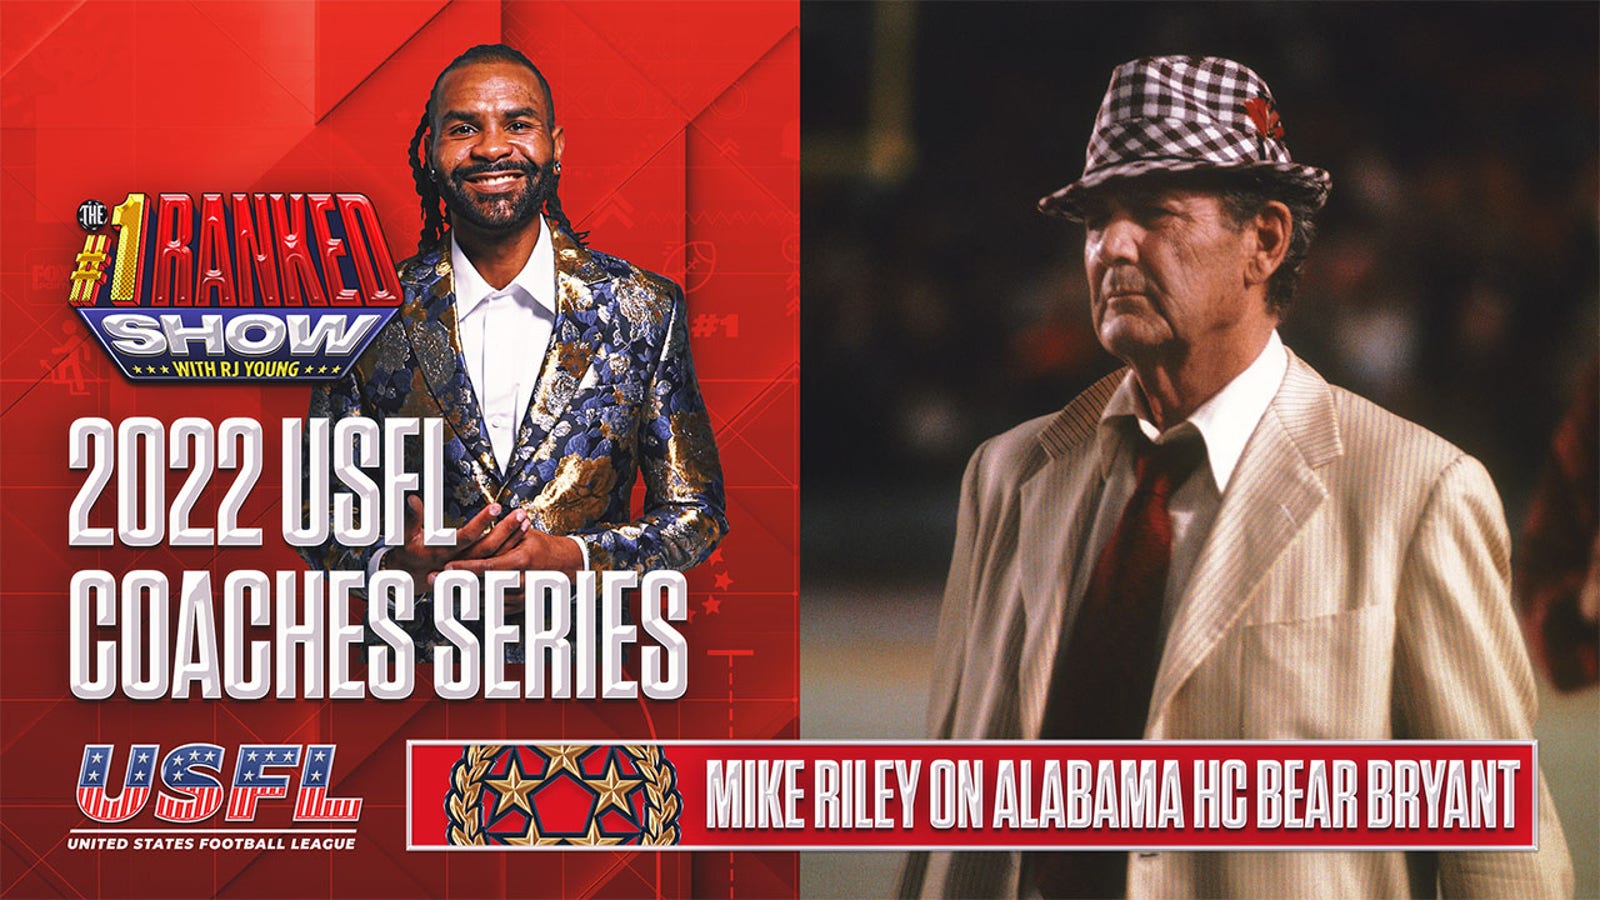 Bear Bryant's impact on Mike Riley